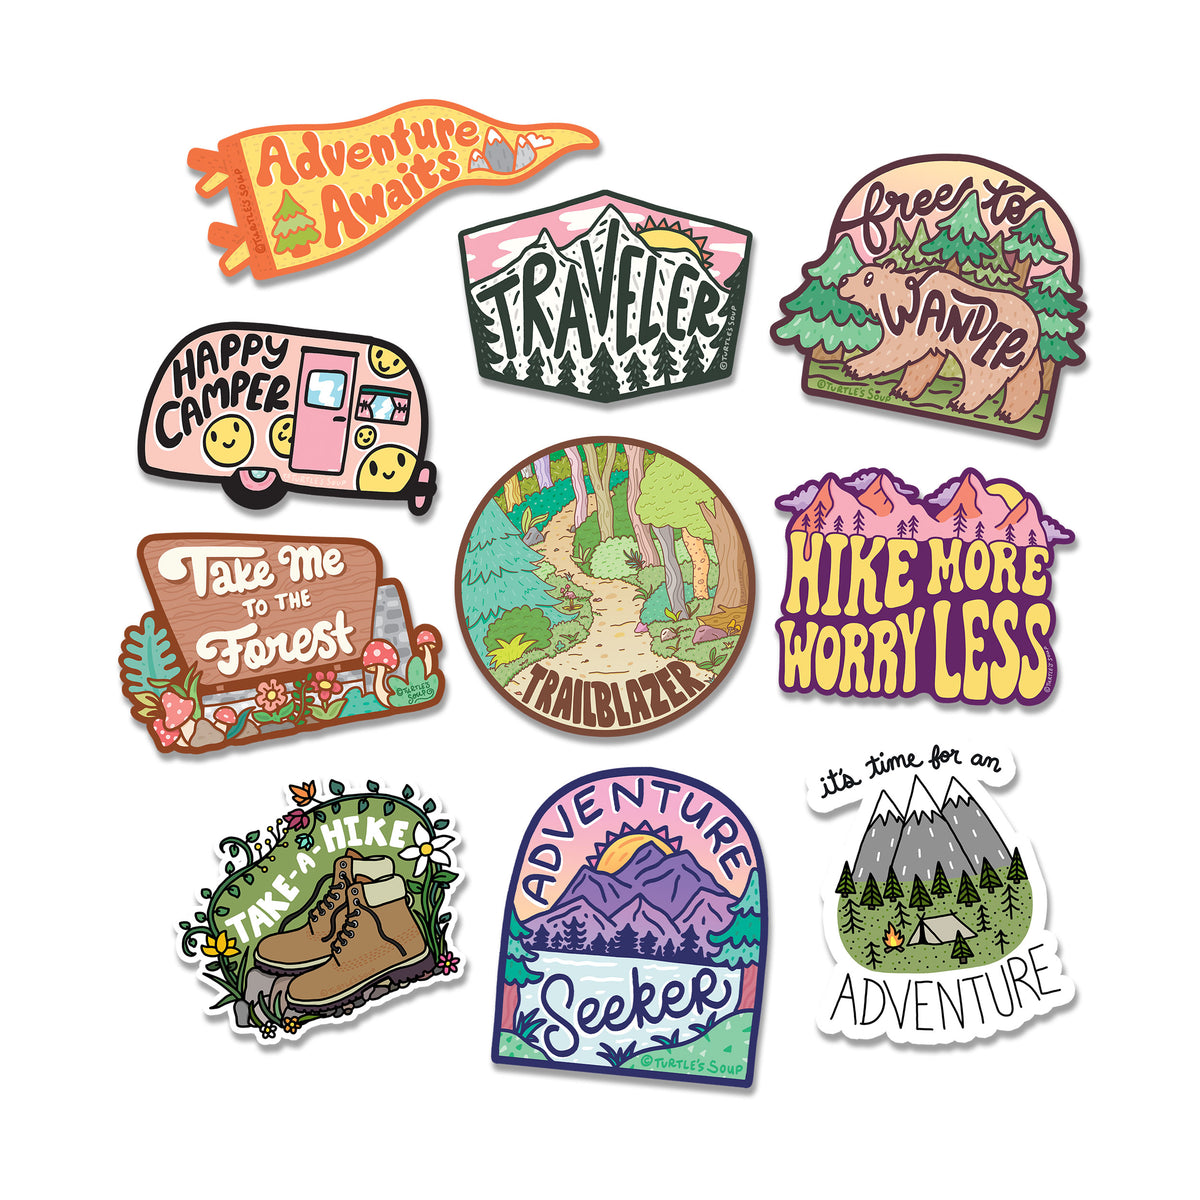 50 Natural Forest Stickers Outdoor Stickers Wilderness Forest Tree Stickers  Crafts, Water Bottles, Journaling, and More 0145 